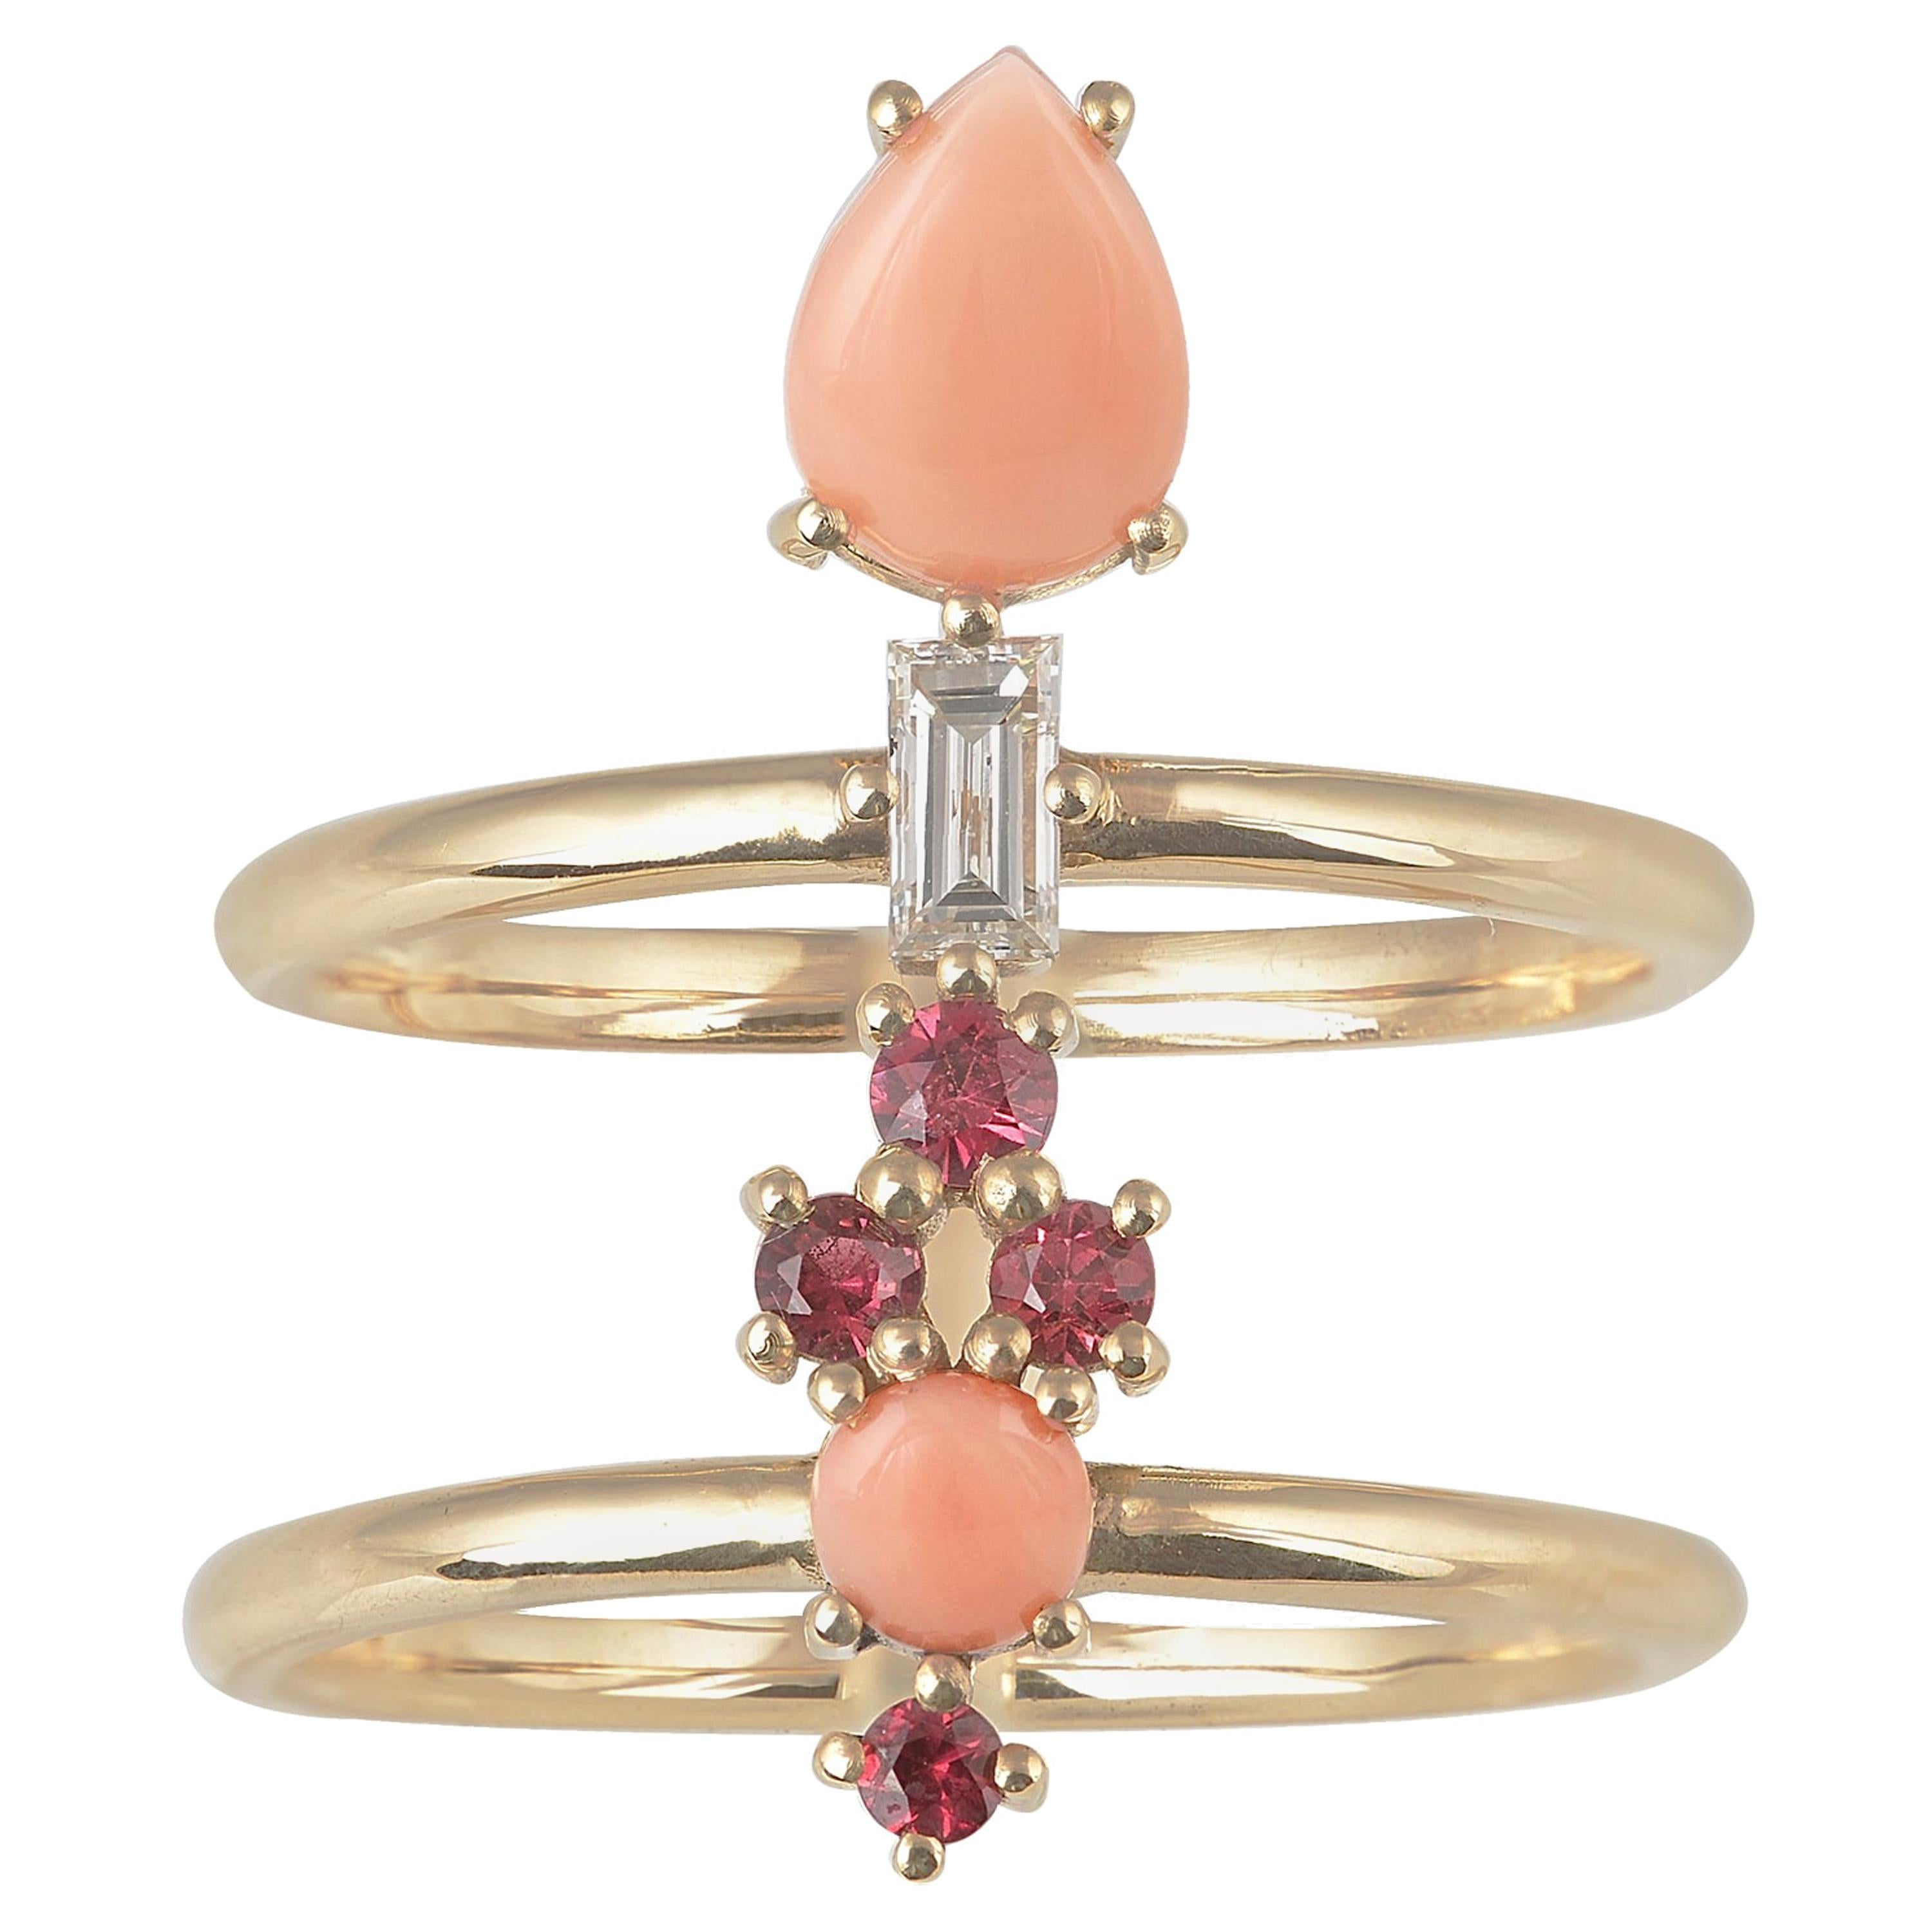 Colorful 18 Karat Gold Ring with Spinels, Corals and a Baguette Diamond